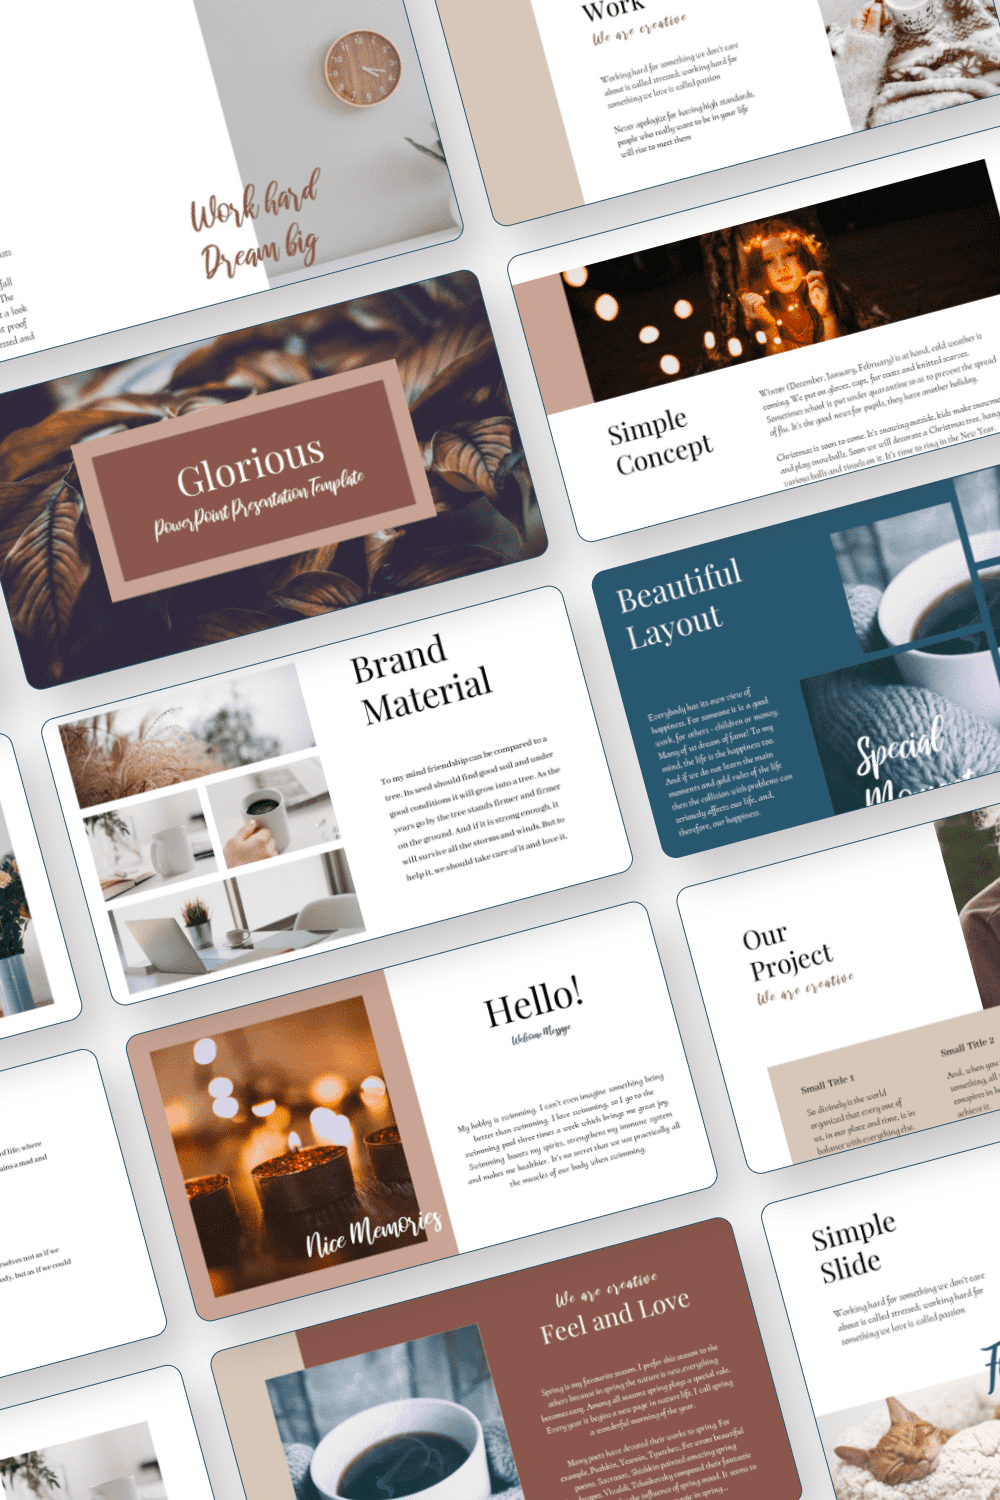 Glorious PowerPoint Template by MasterBundles Pinterest Collage Image.